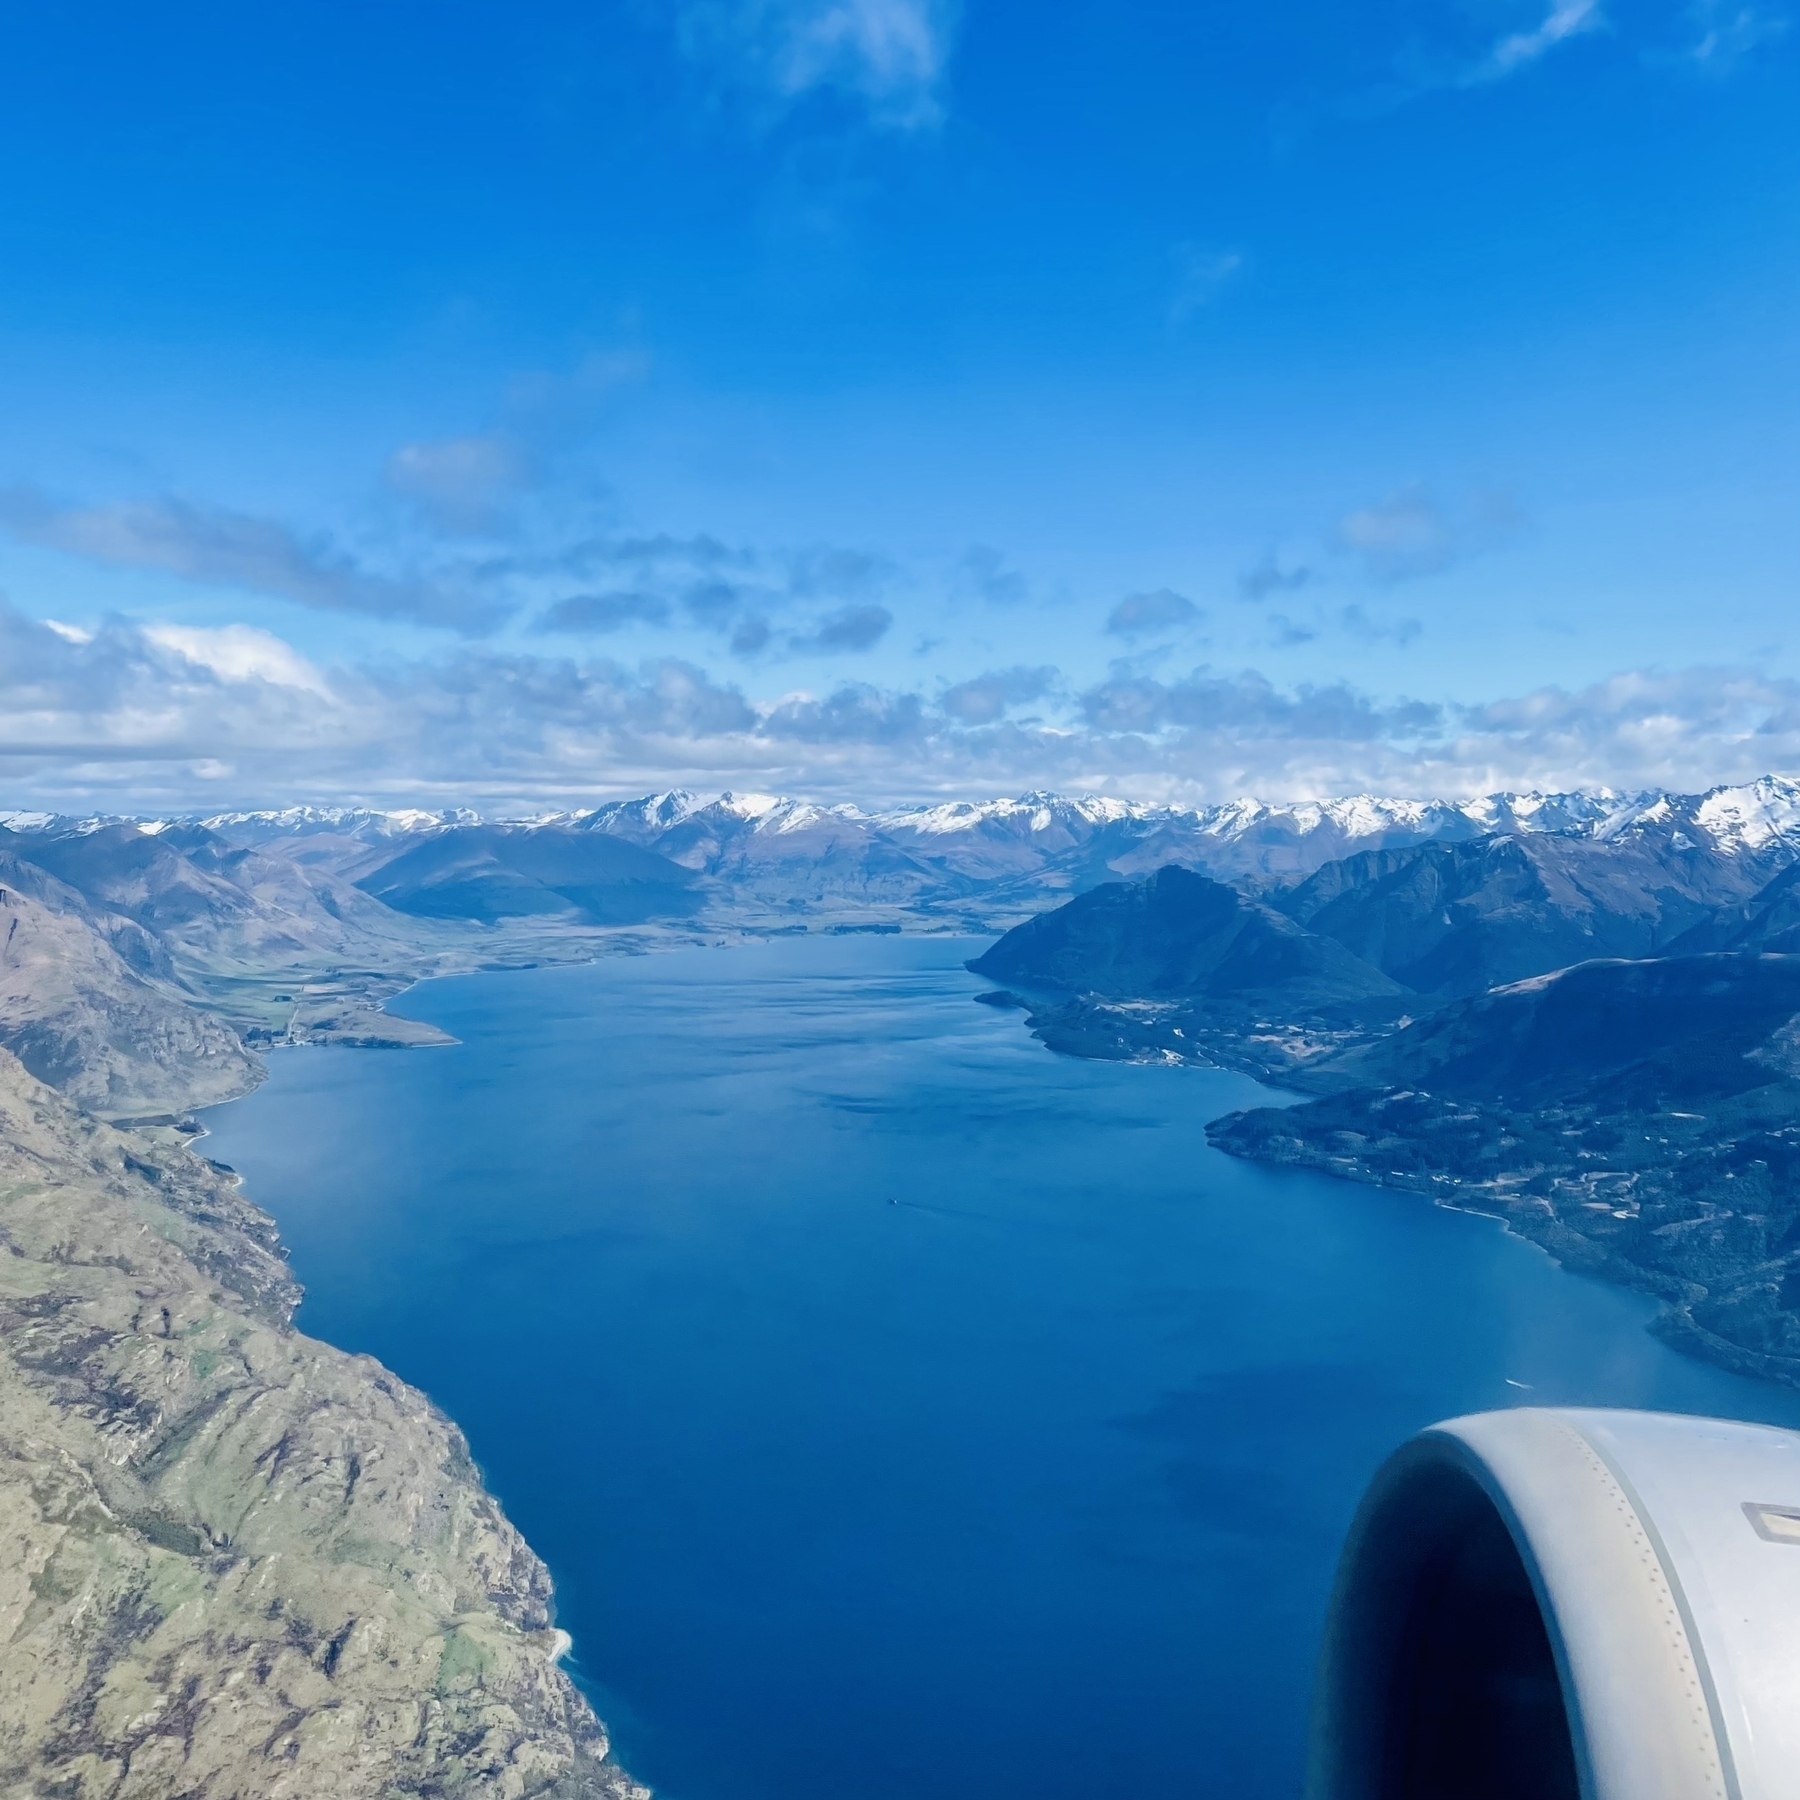 A New Zealand fjord. Blue water in the middle, green mountains on both sides, a full horizon of snow-capped peaks in the distance, and a plane engine in the lower-right.